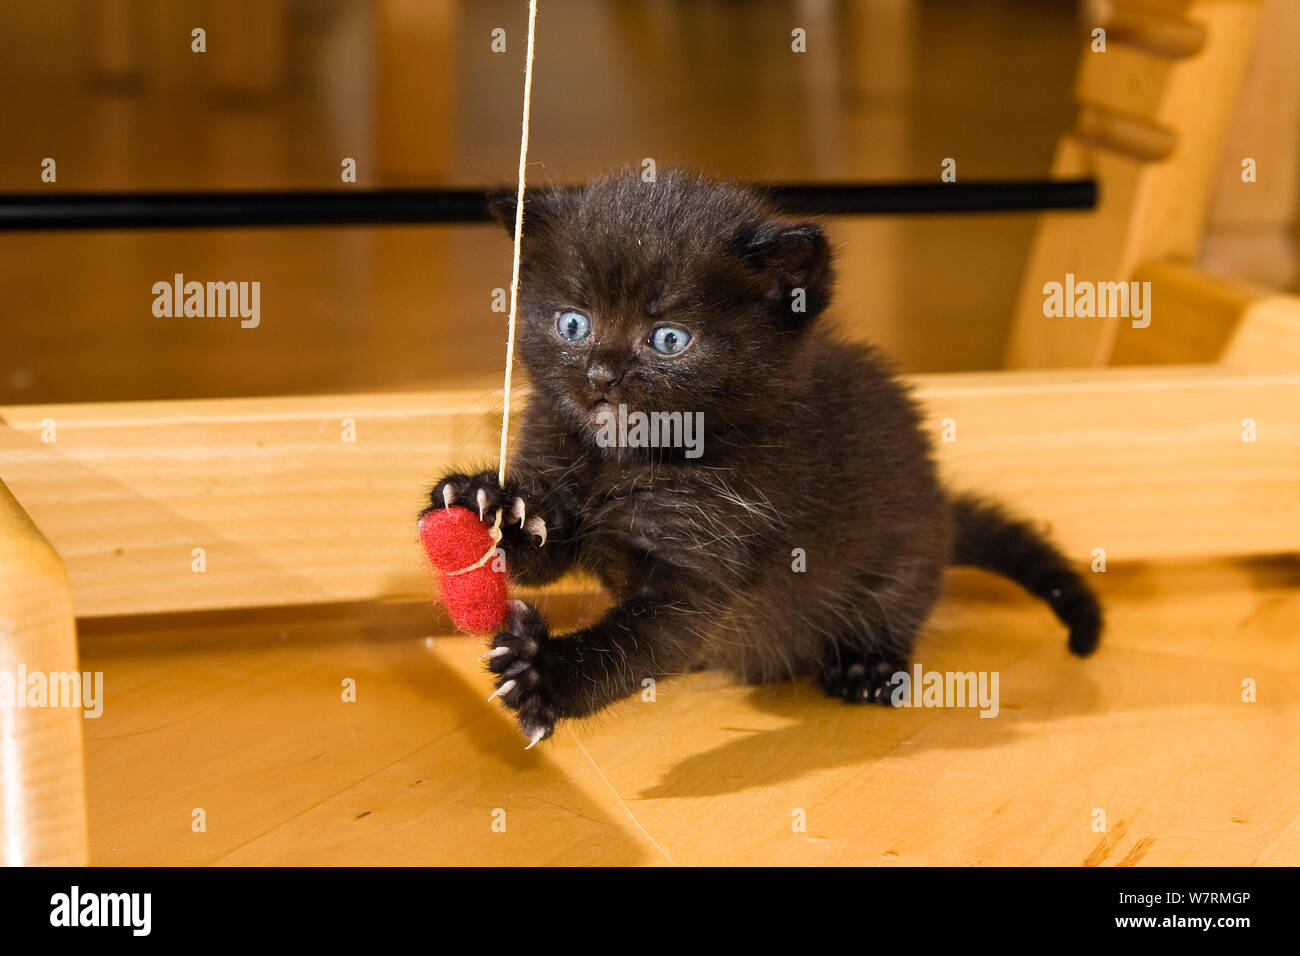 Black kitten playing with toy, Germany Stock Photo